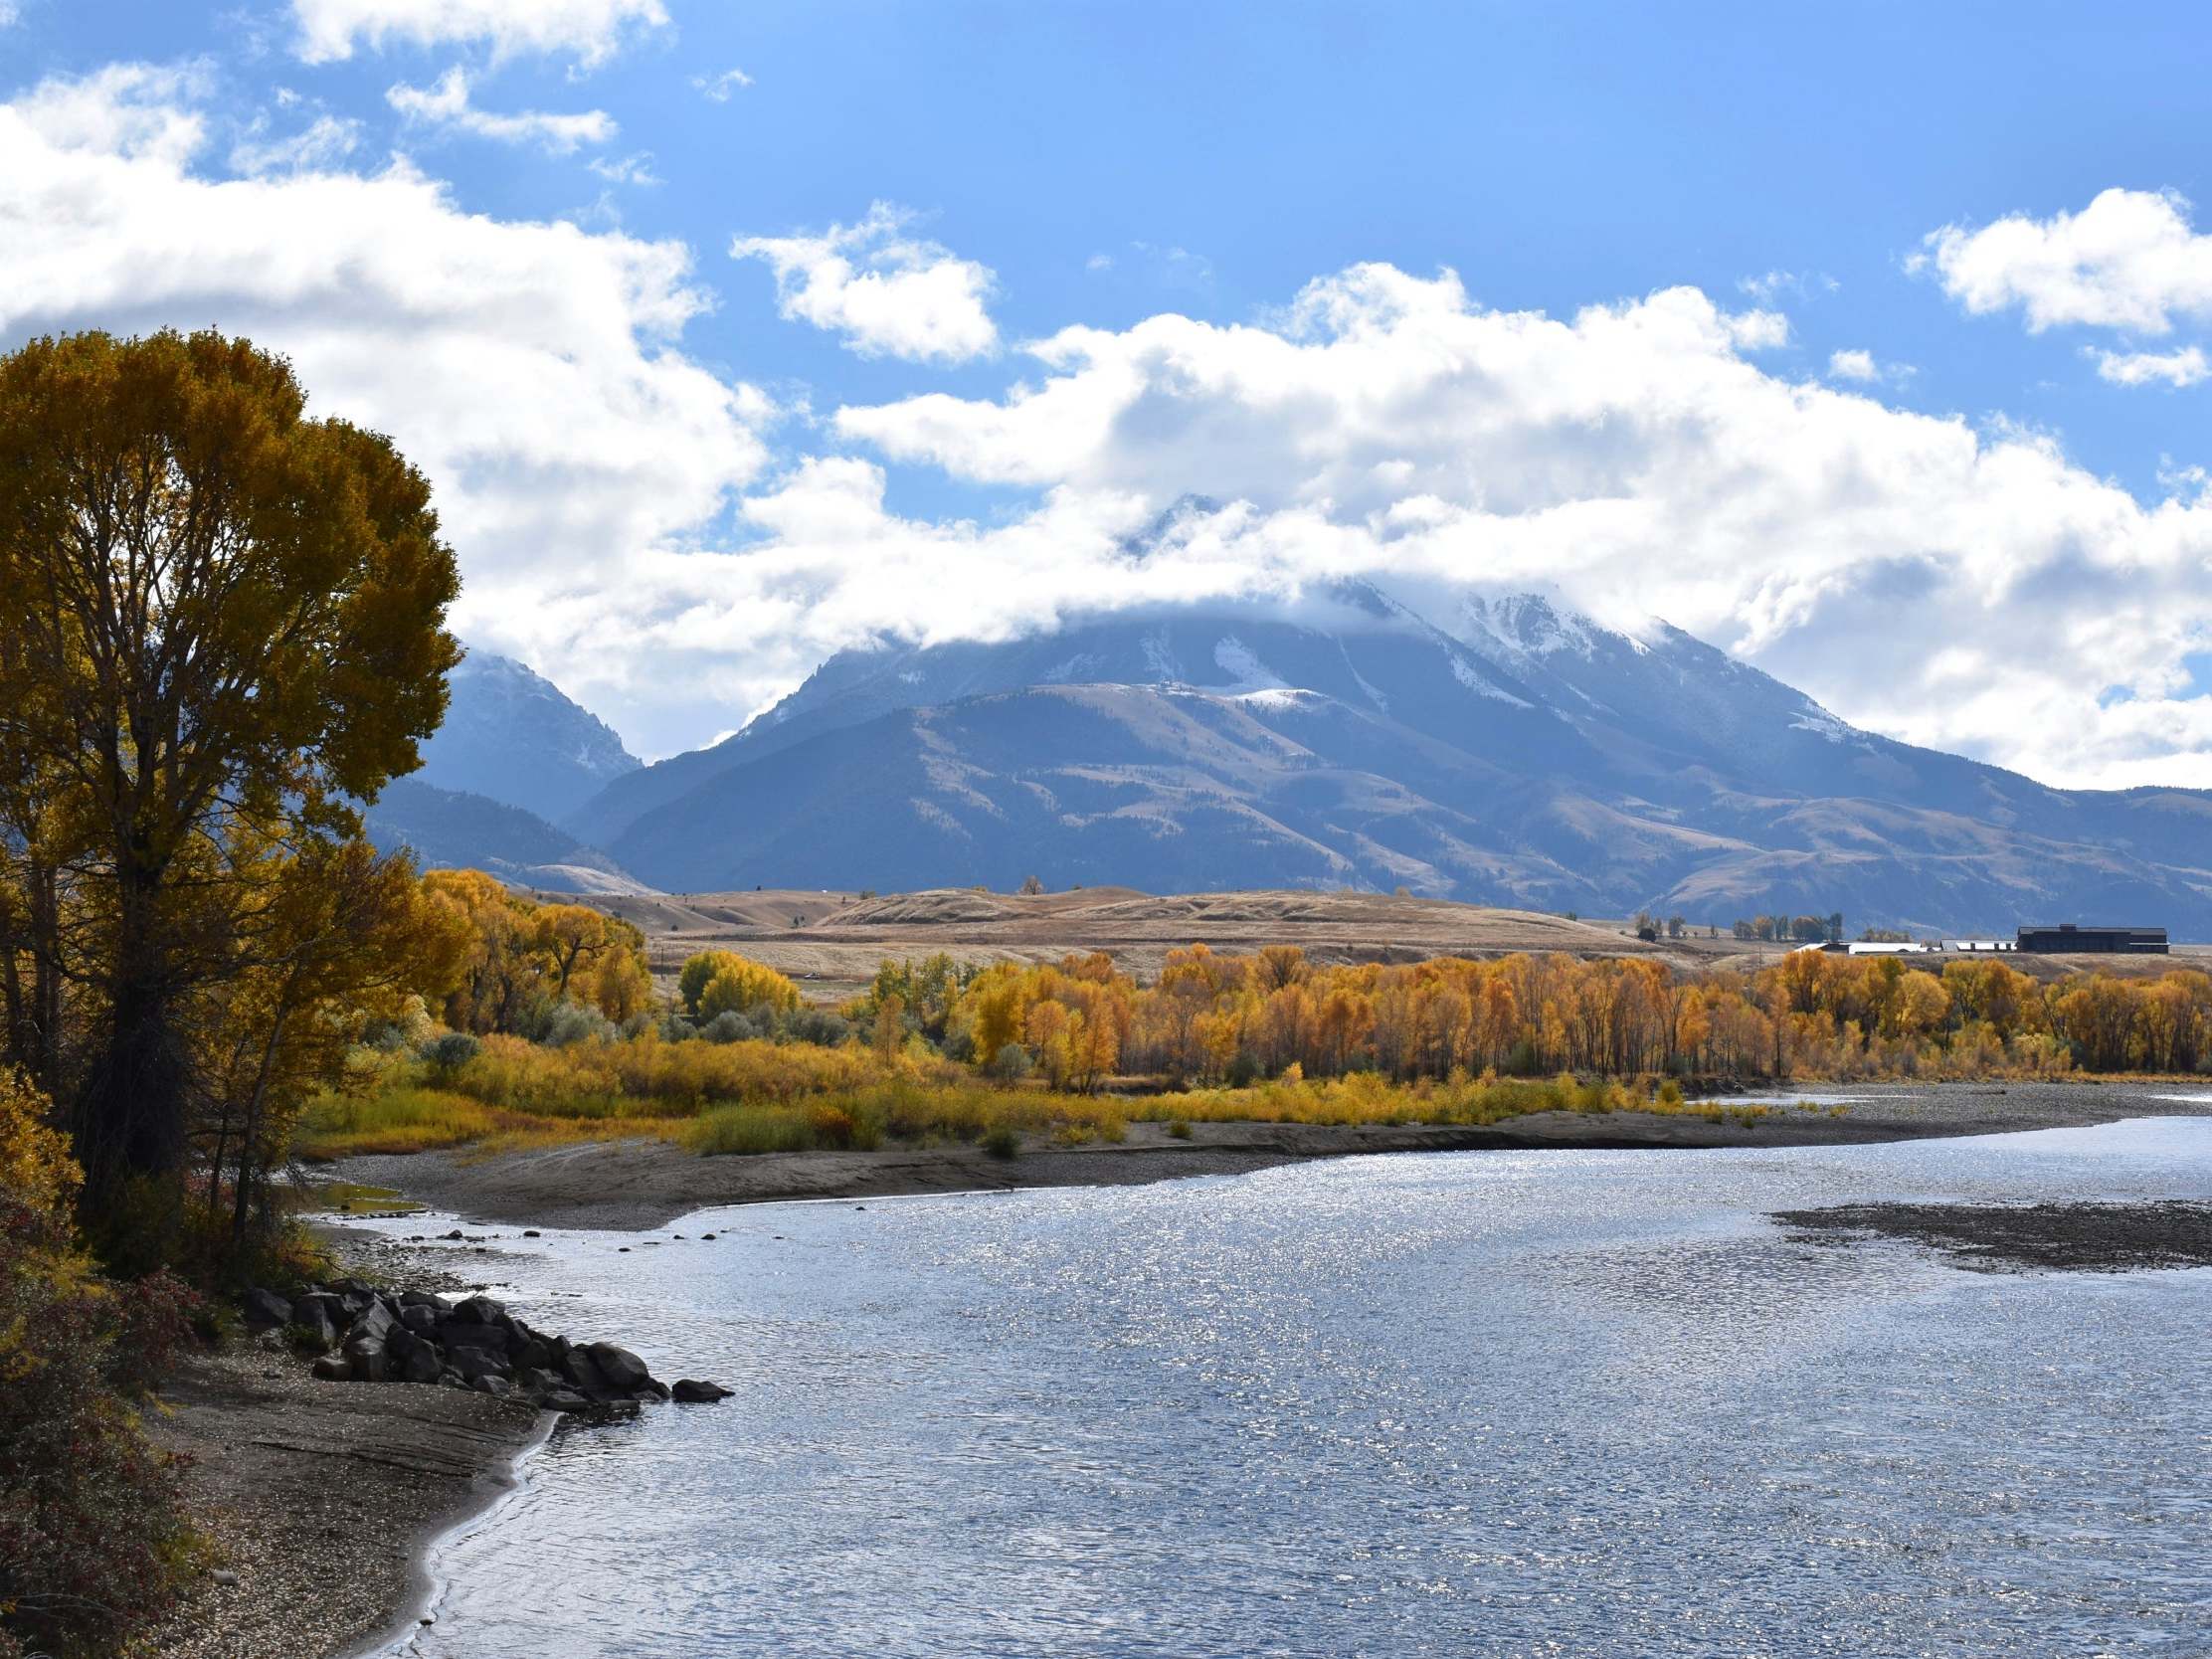 Emigrant Peak is seen rising above the Paradise Valley and the Yellowstone River near Emigrant, Montana